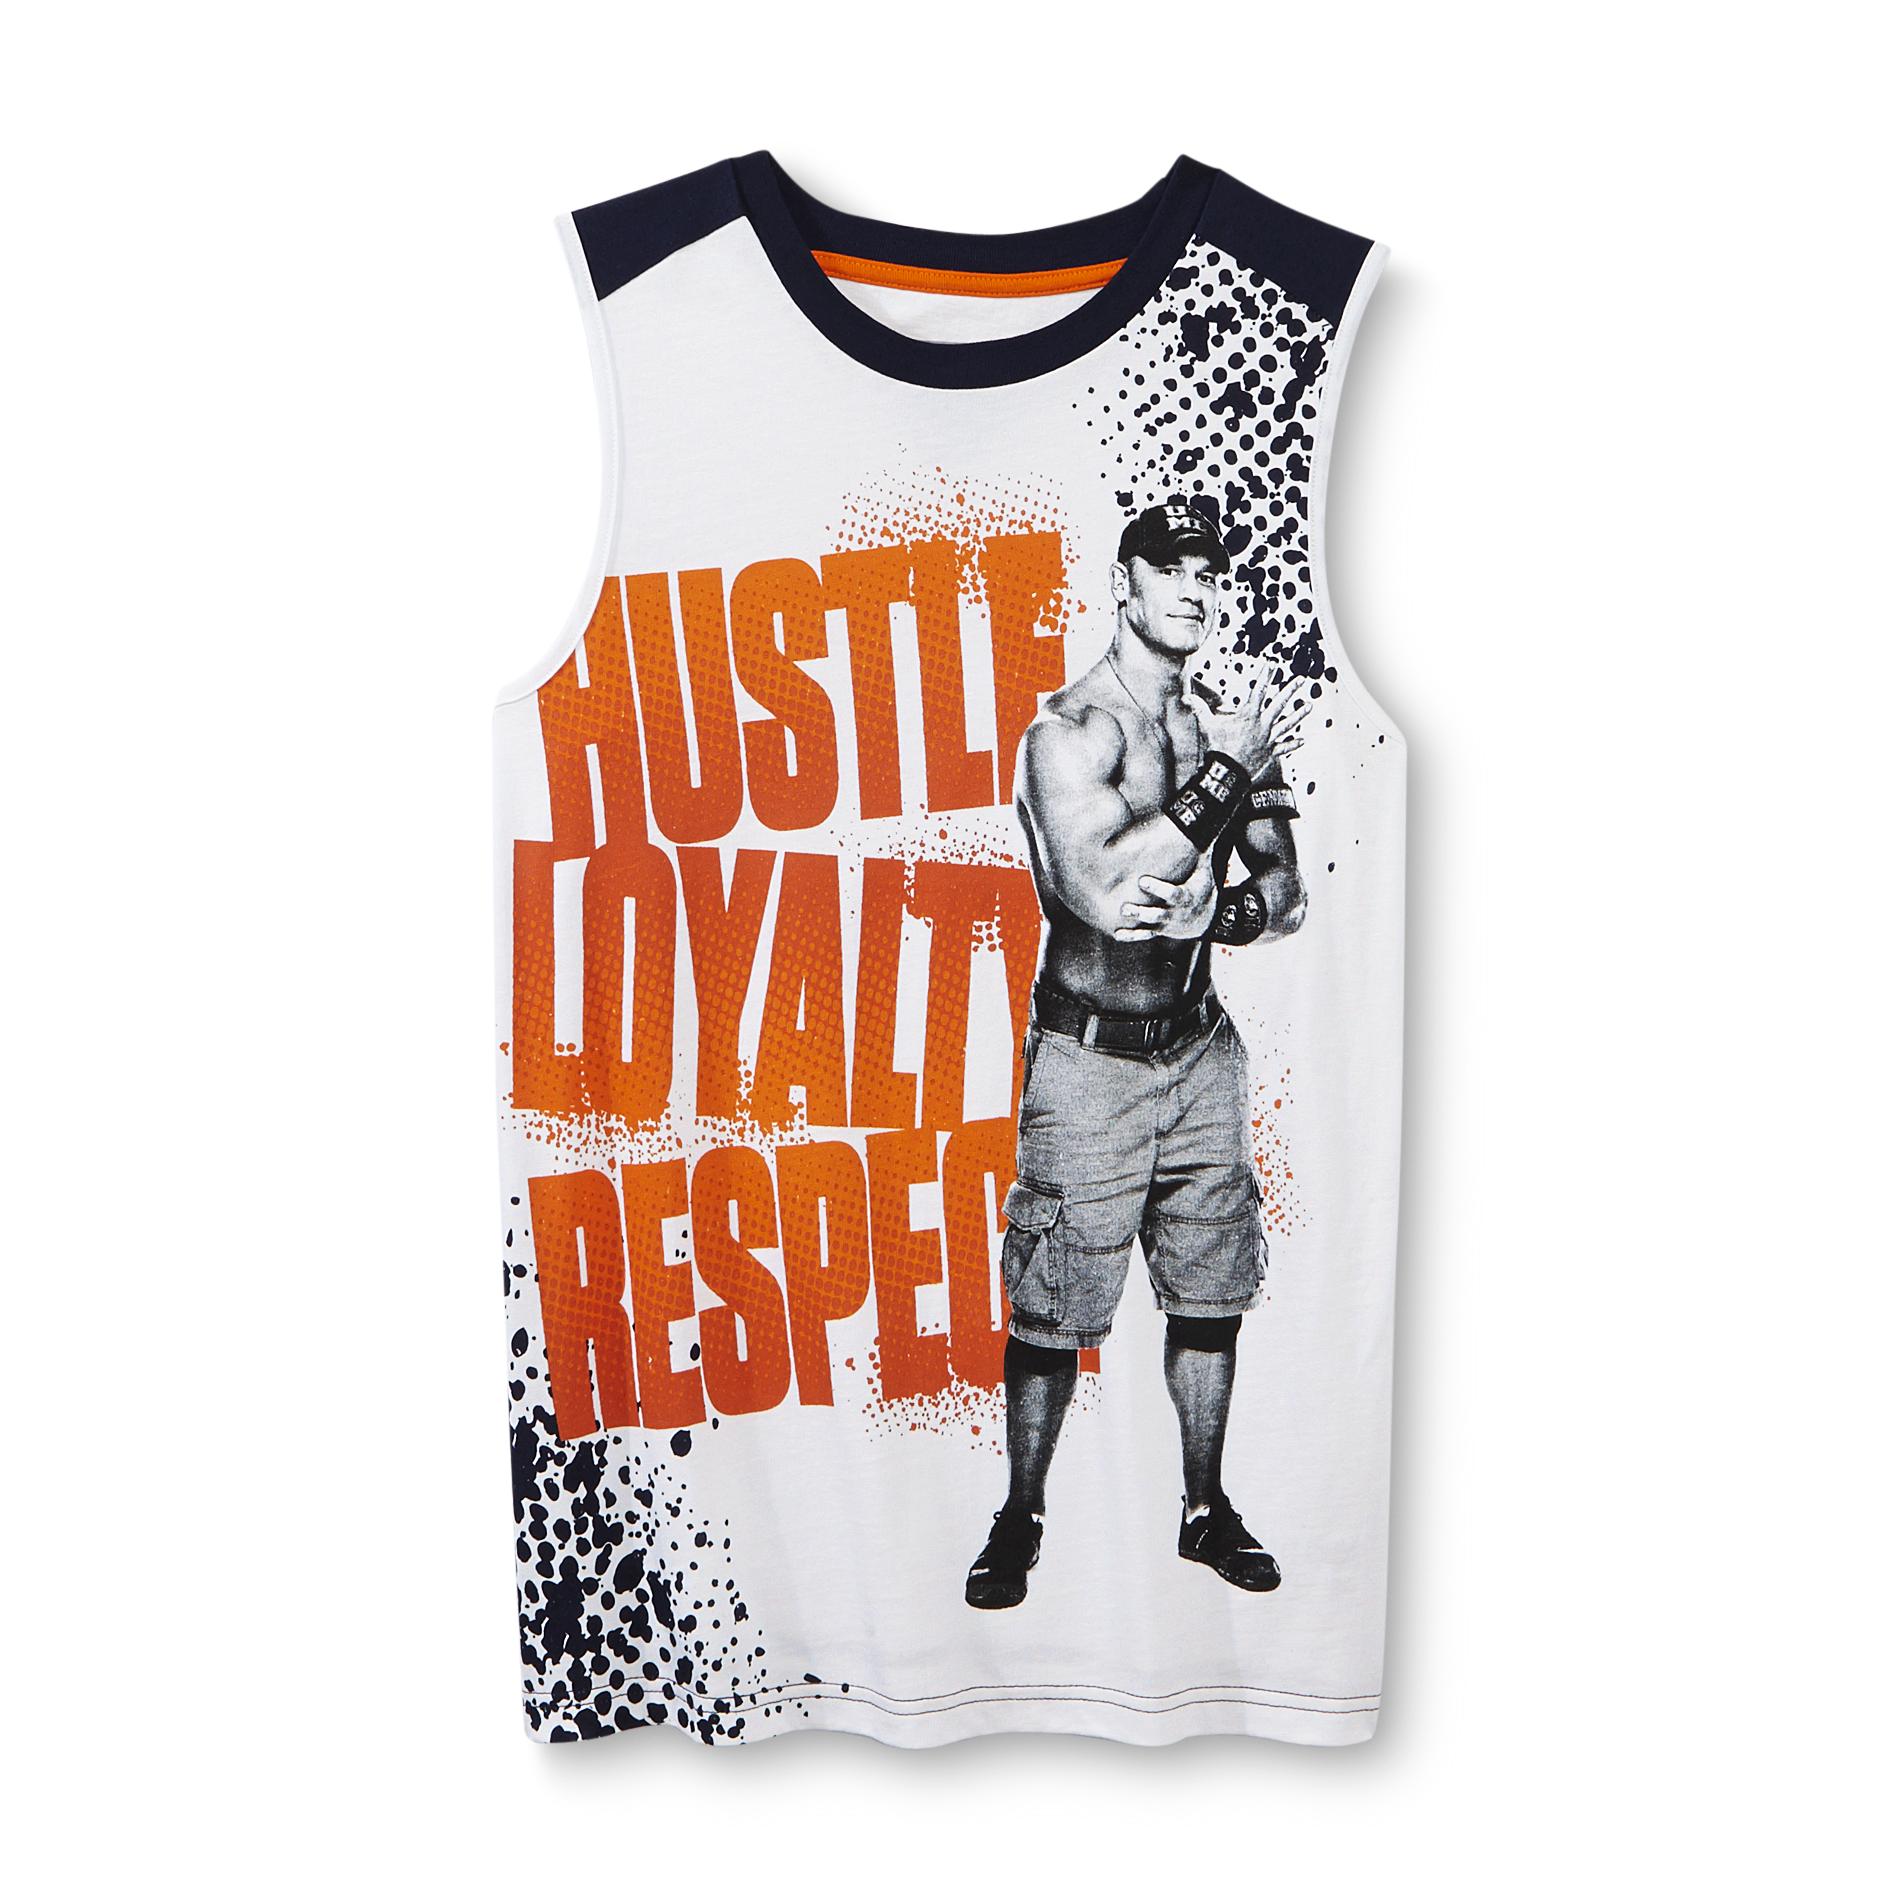 Never Give Up By John Cena Boy's Graphic Tank Top &#8211; Hustle  Loyalty  Respect